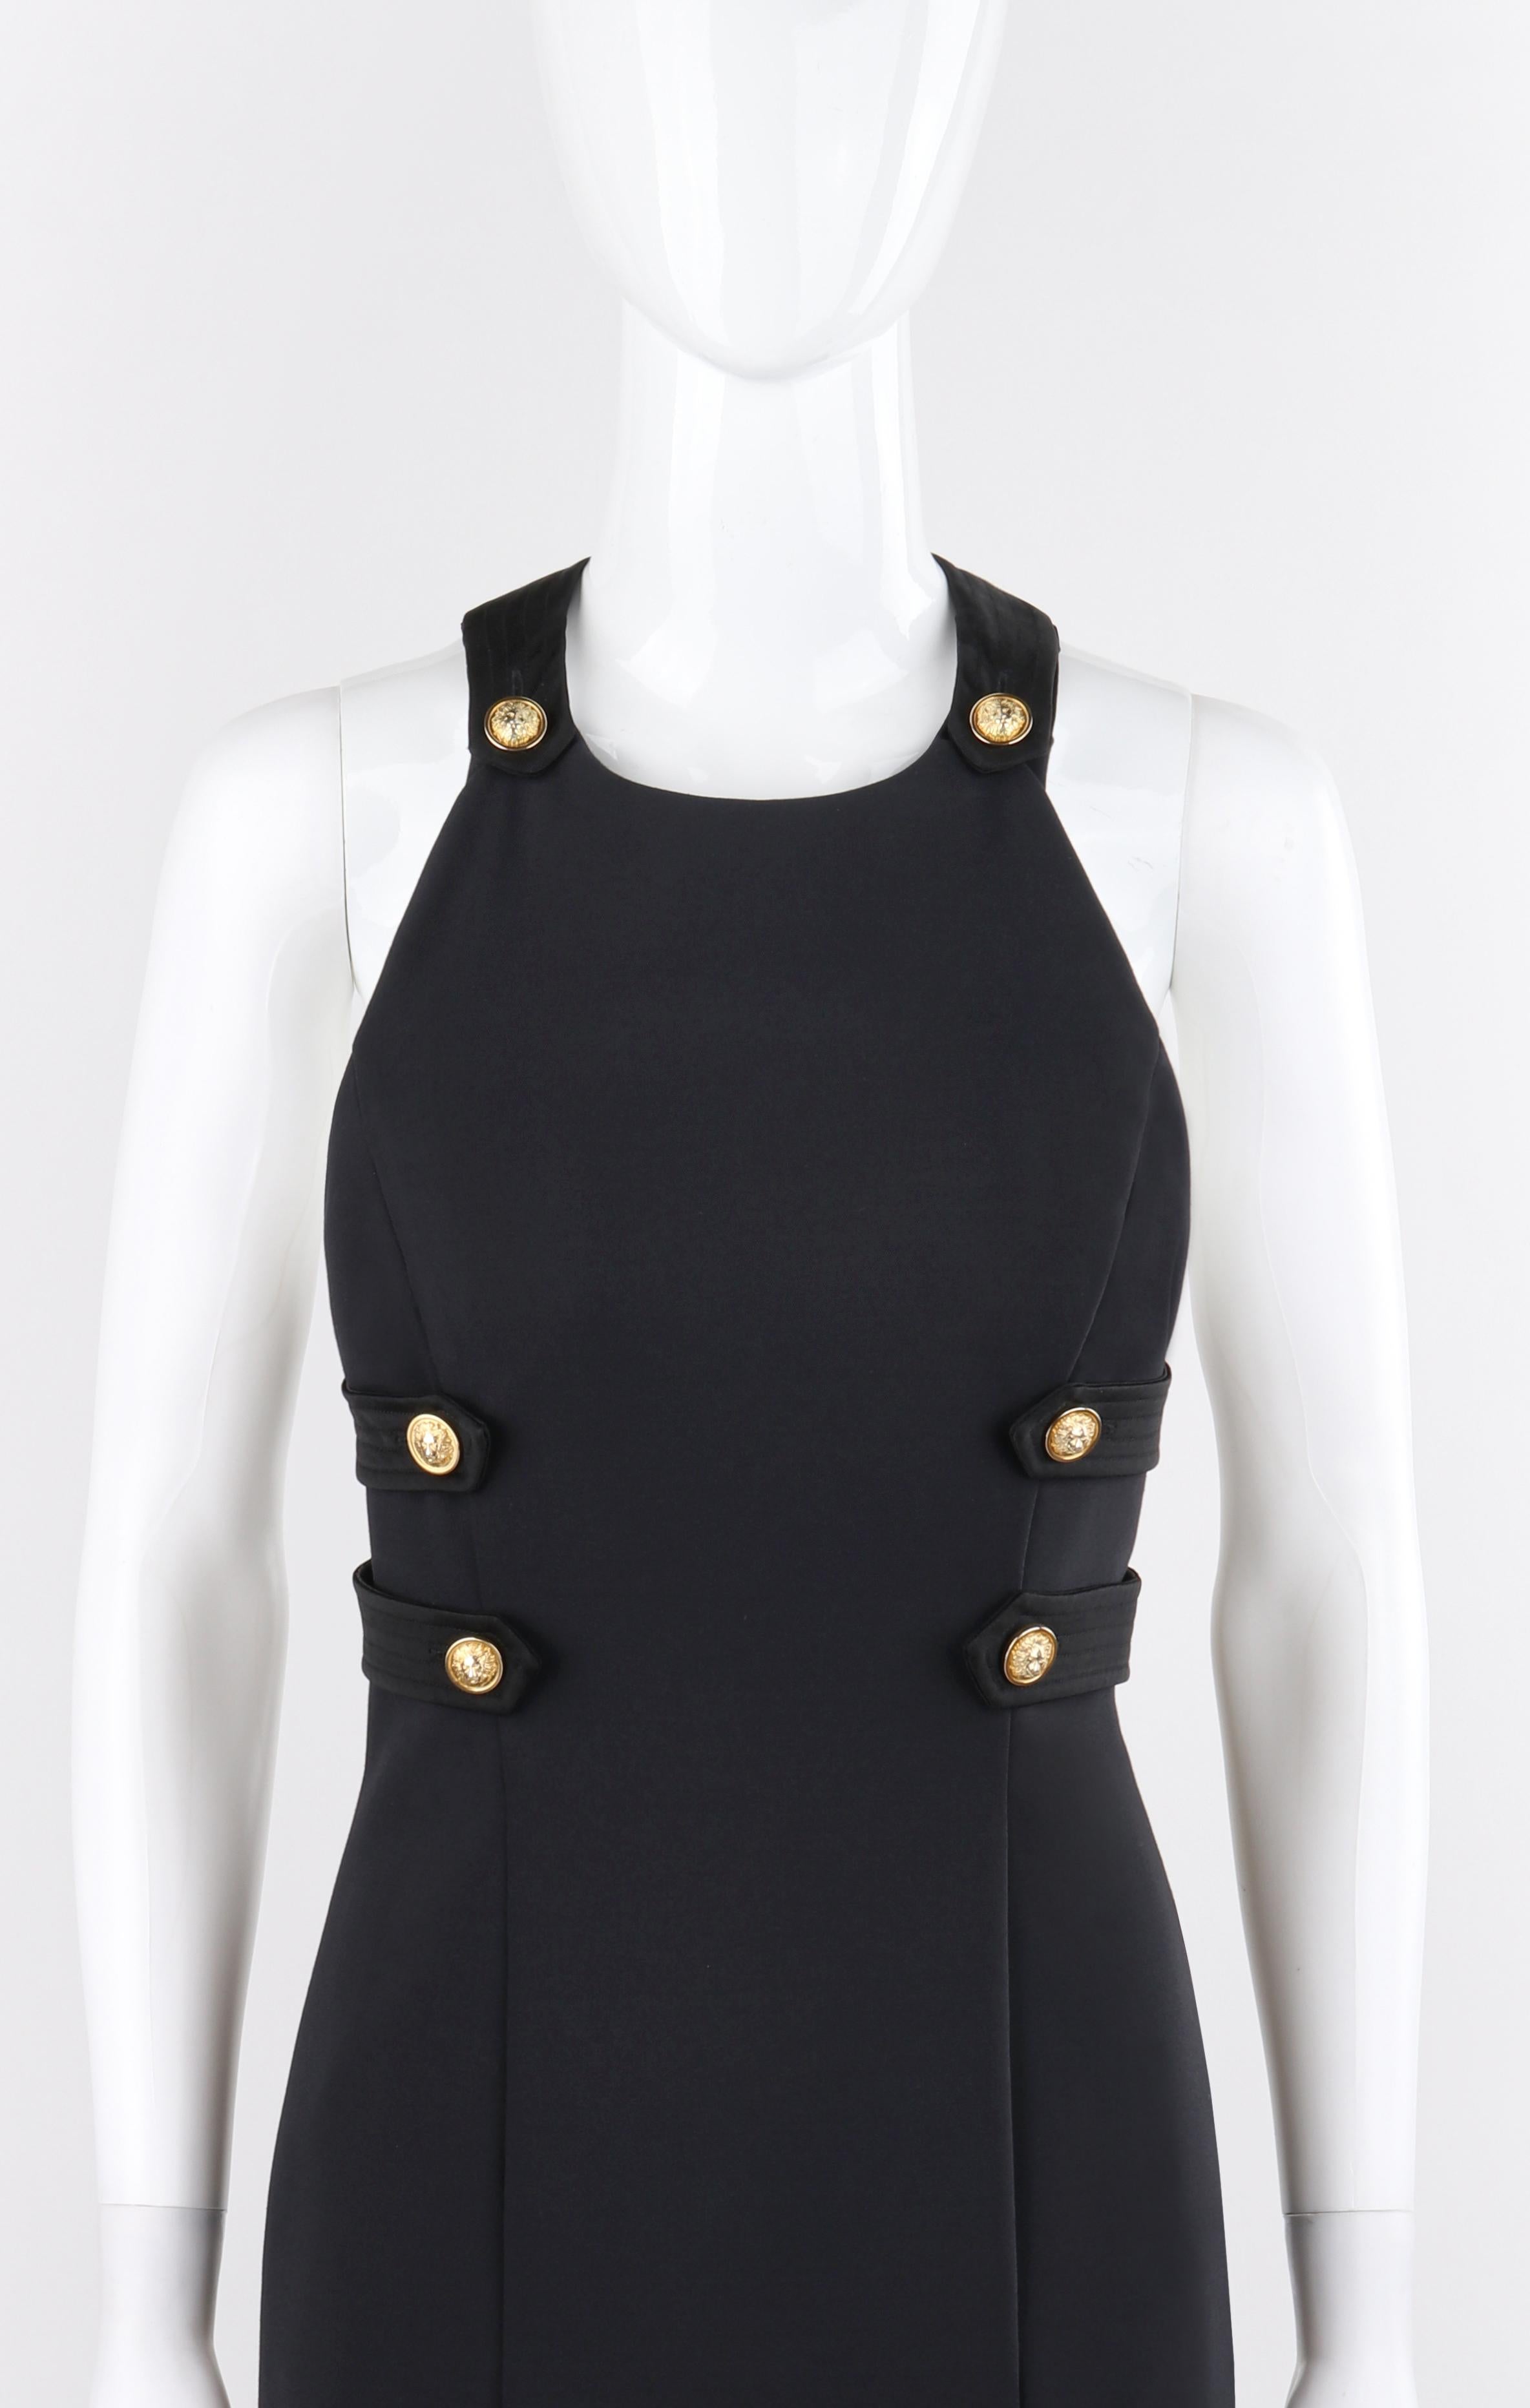 versace black dress with gold buttons